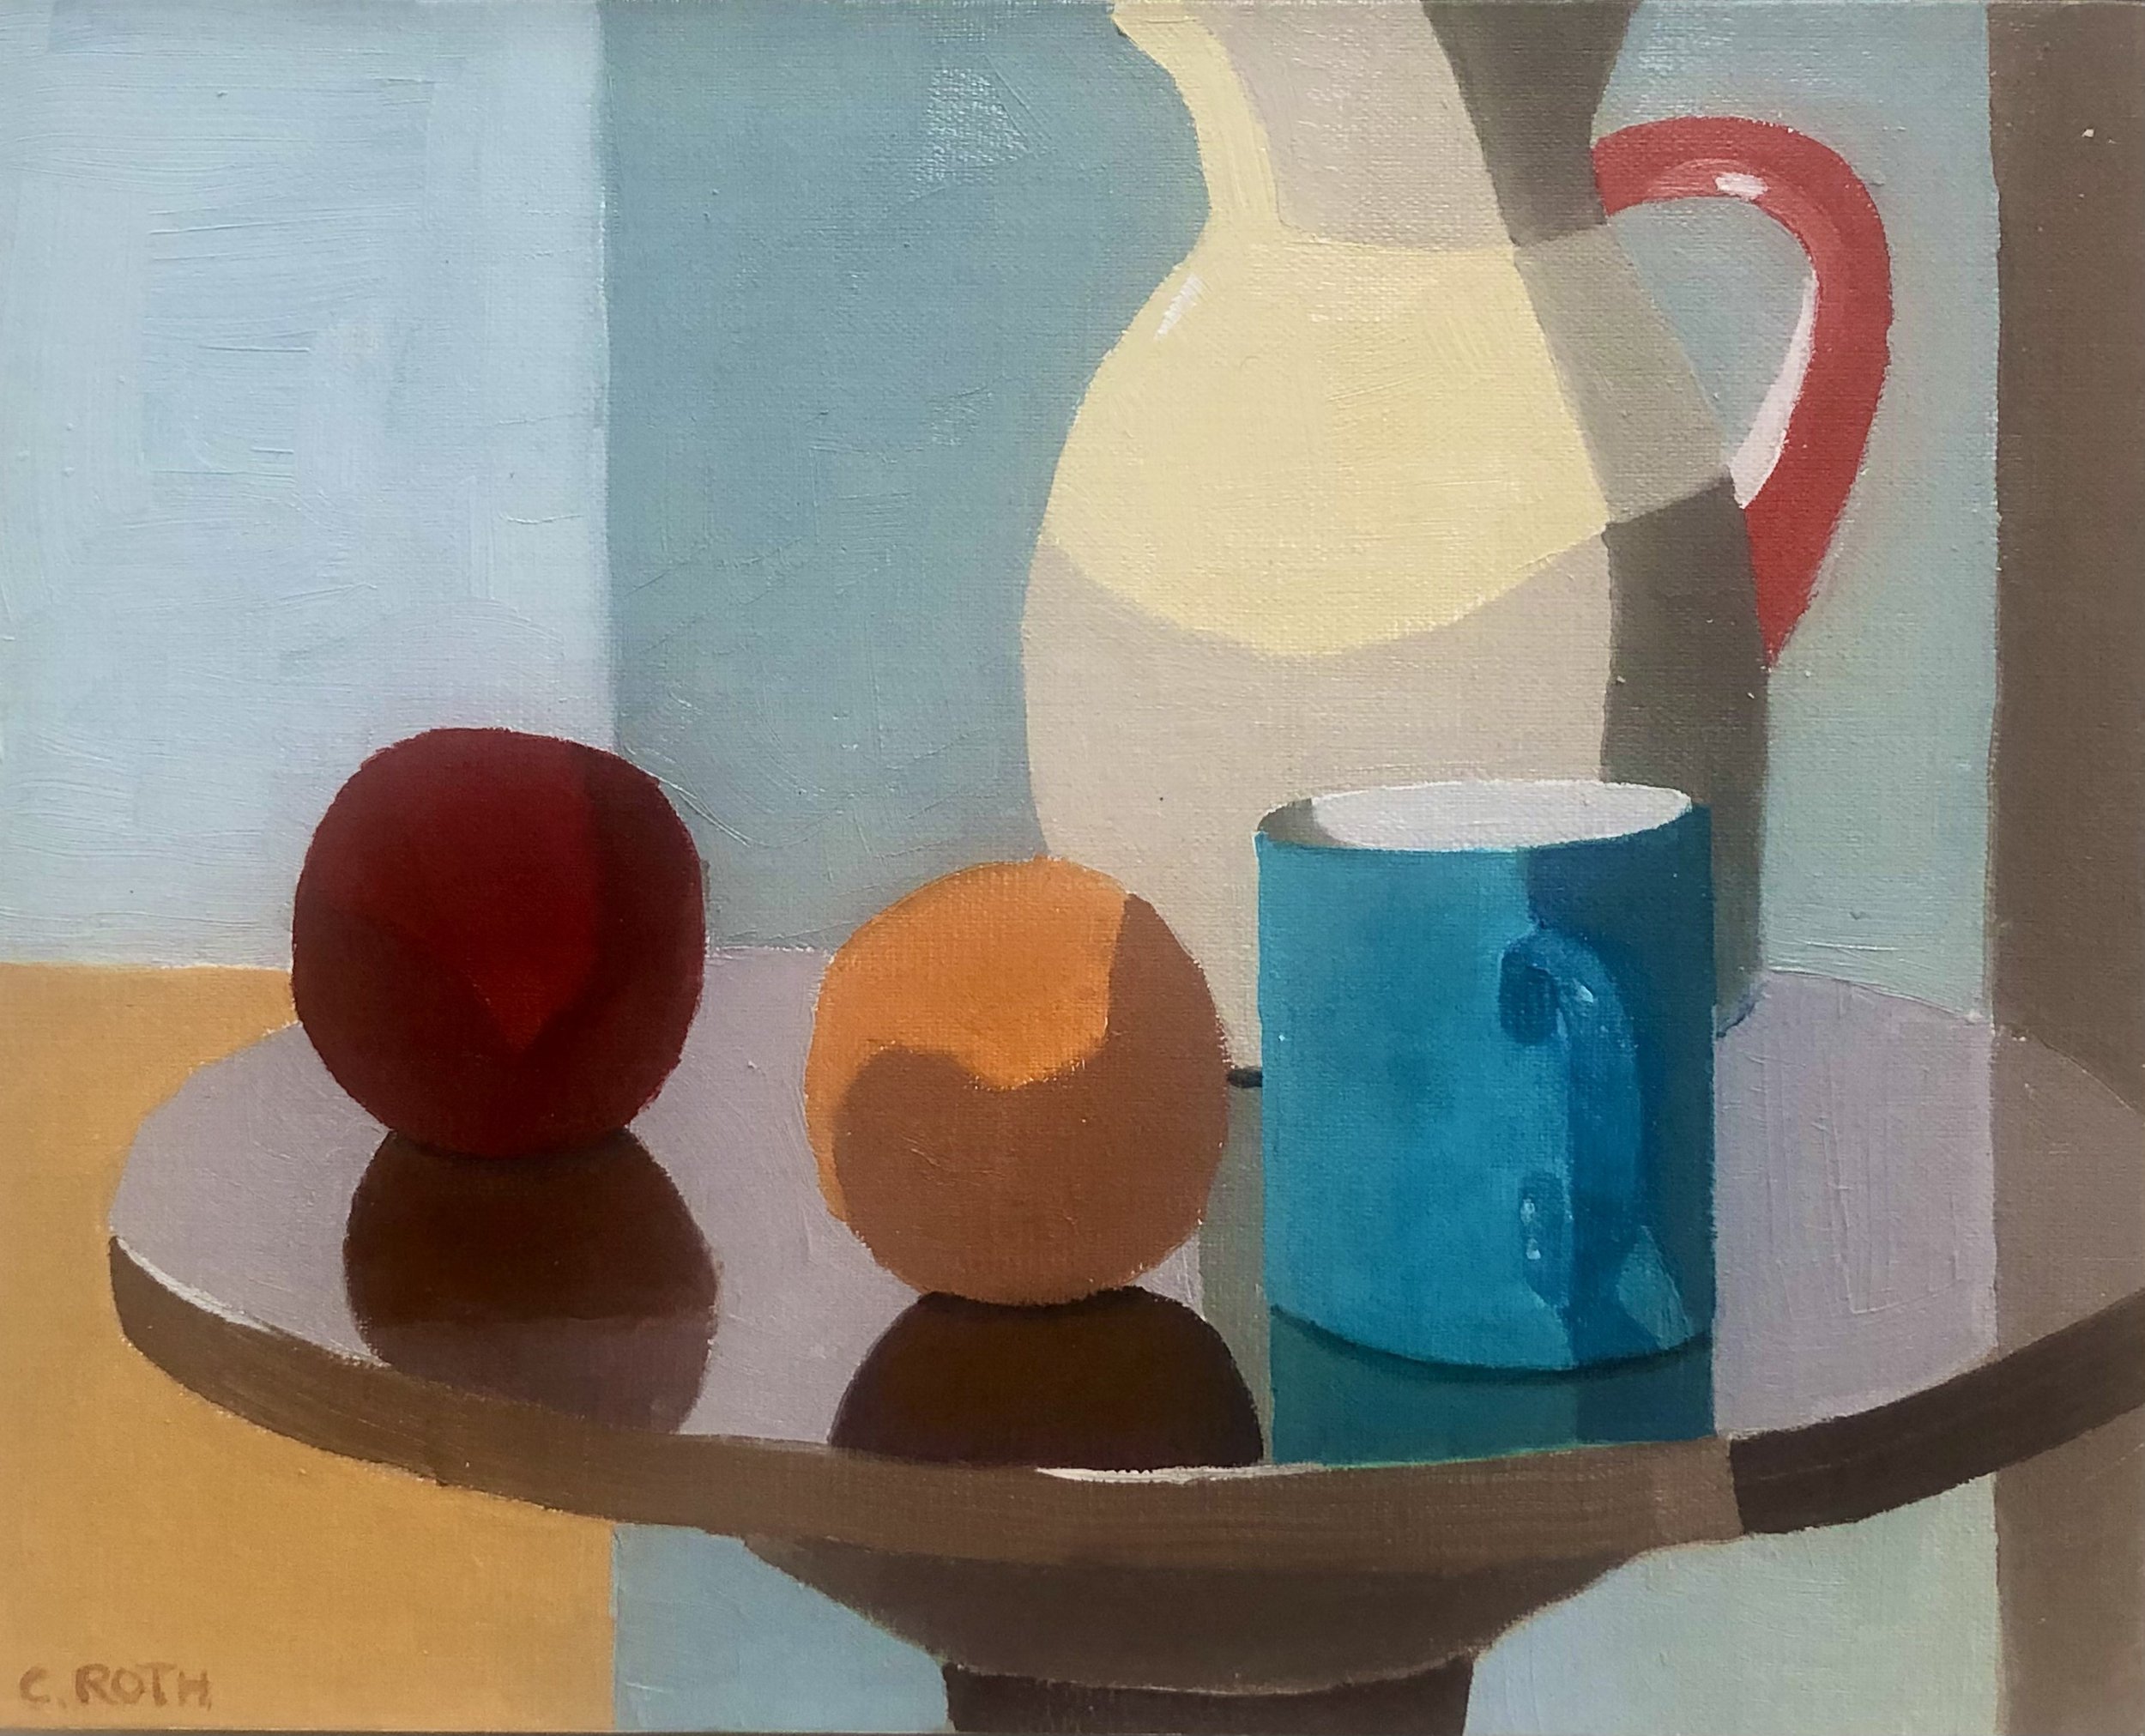 Teal Cup Meets Apple and Orange by Carla Roth